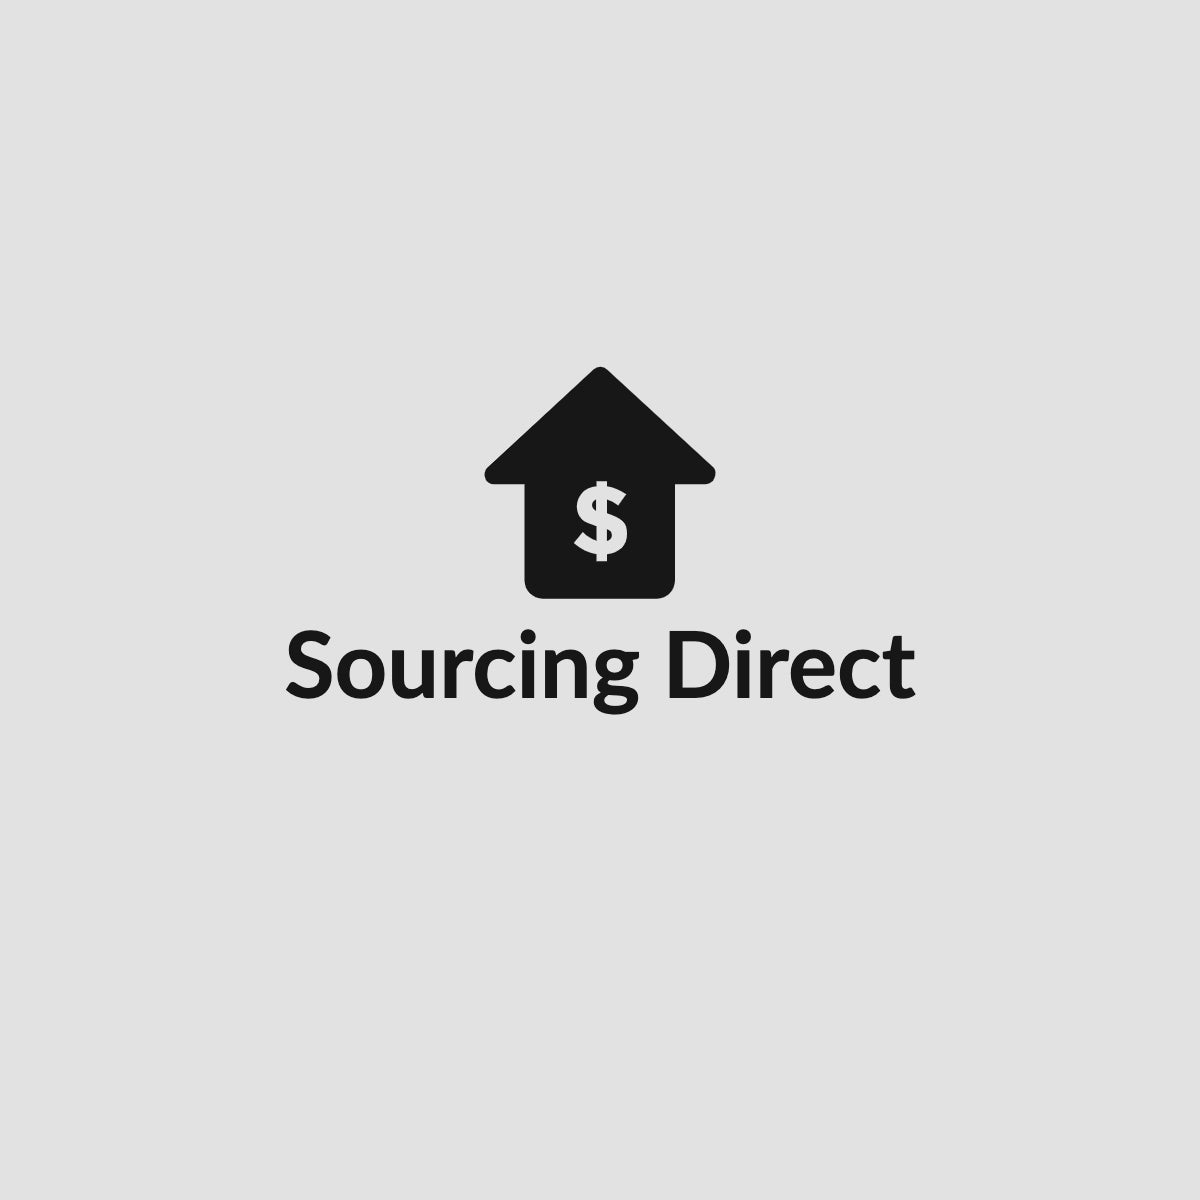 Sourcing Direct